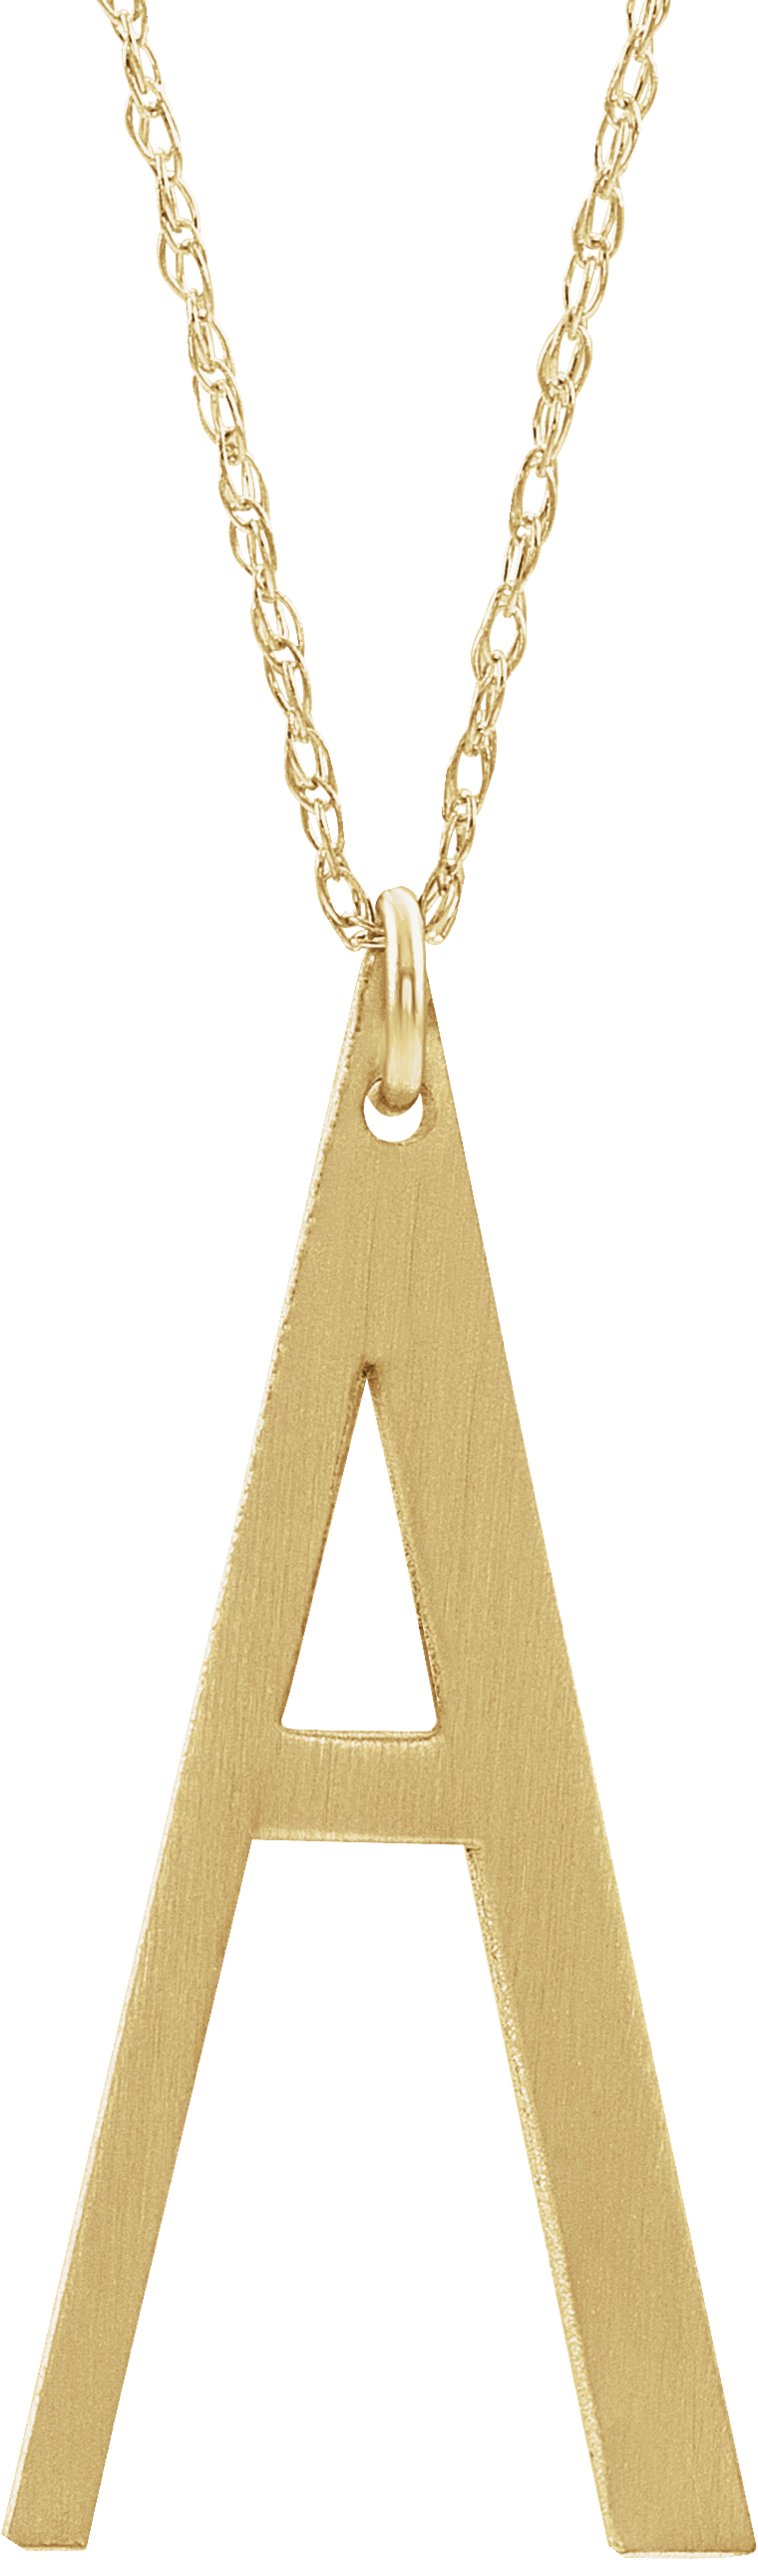 14K Yellow Gold-Plated Sterling Silver Block Initial A 16-18" Necklace with Brush Finish